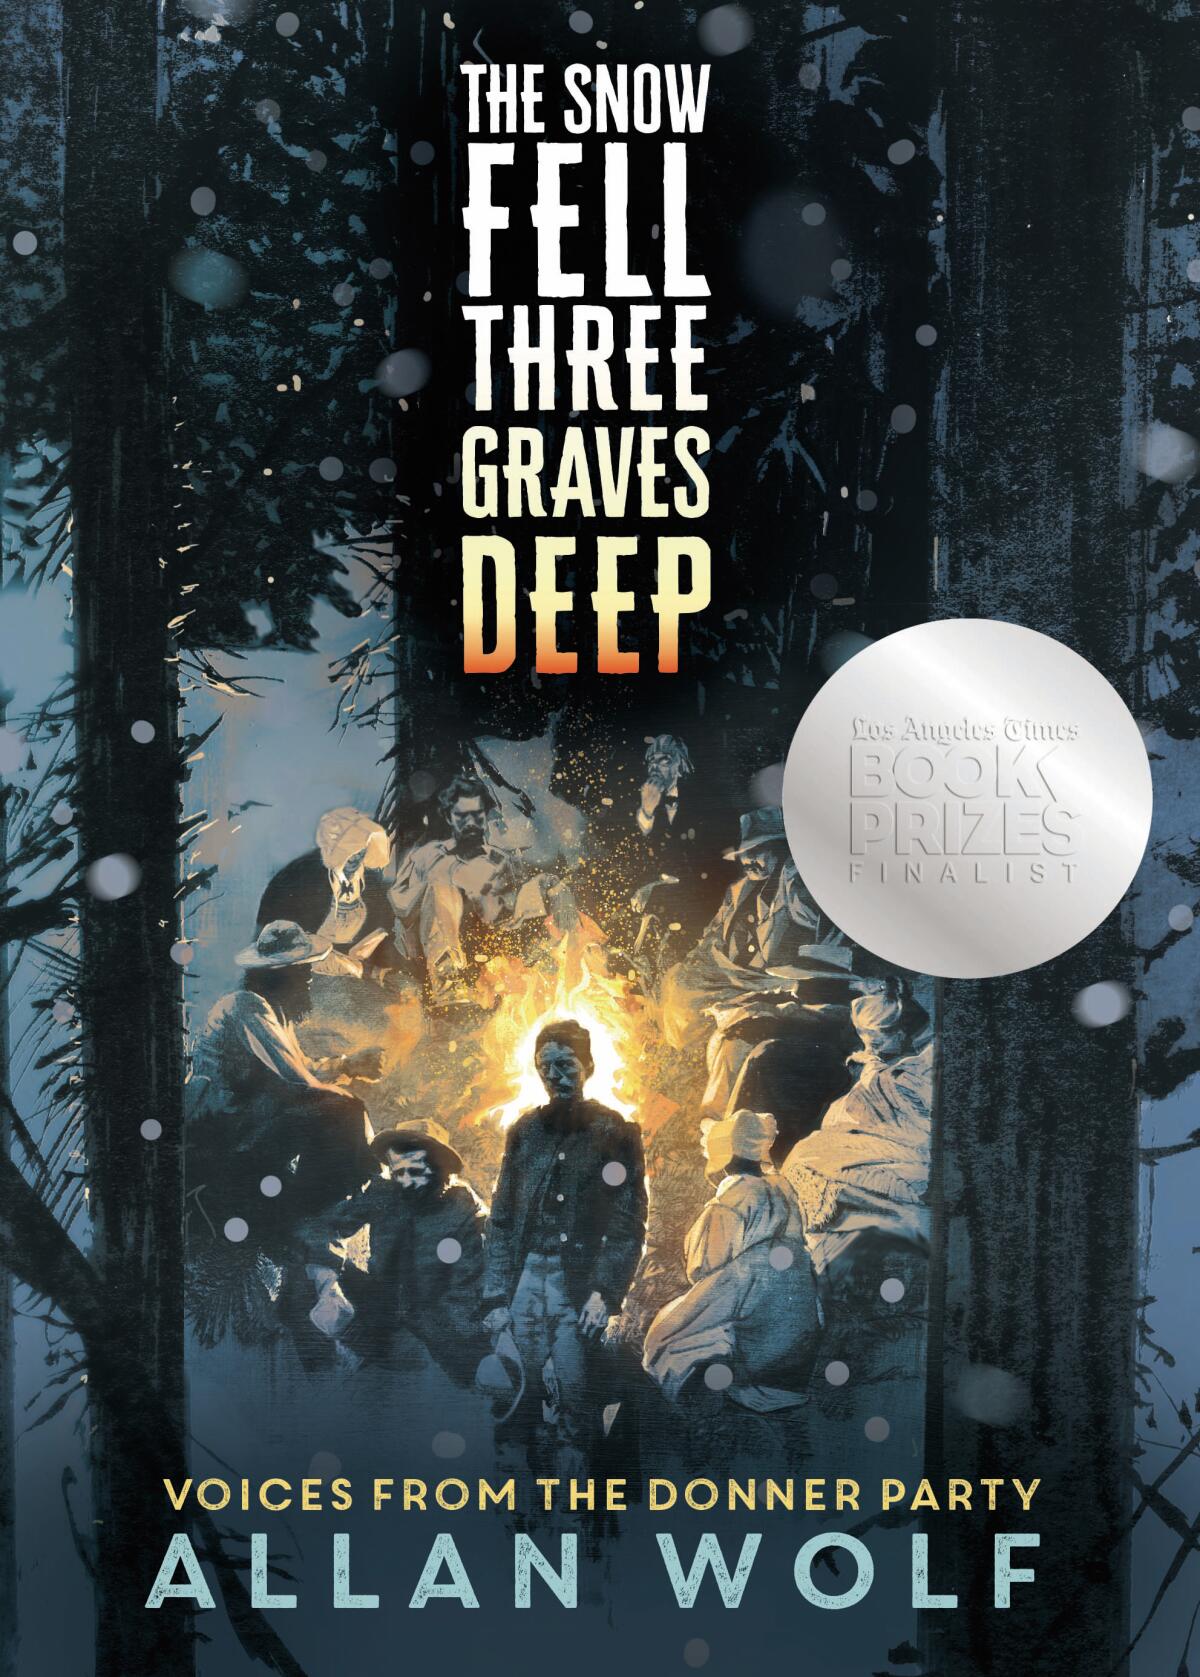 The book jacket for "The Snow Fell Three Graves Deep: Voices From the Donner Party" by Allan Wolf.